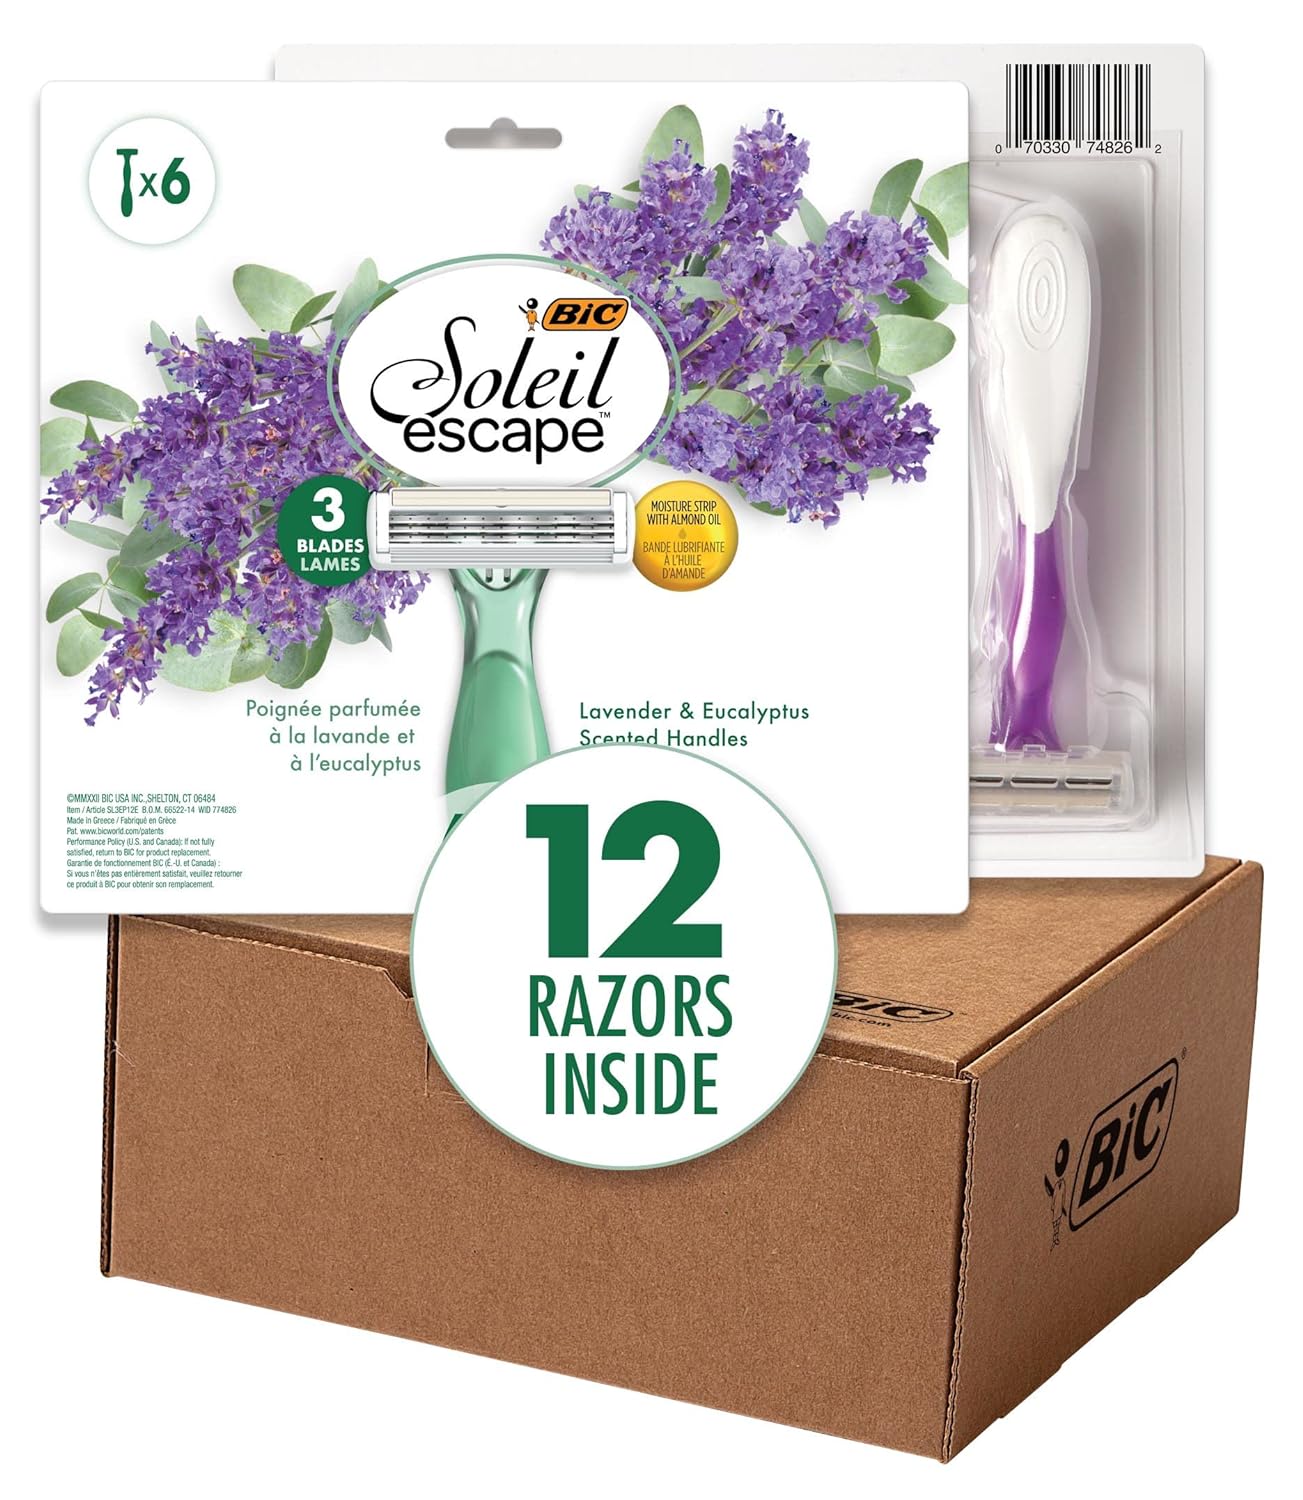 BIC Soleil Escape Women' Disposable Razors With 3 Blades for a Sensorial Experience and Comfortable Shave, Pack of Lavender & Eucalyptus Scented Handle Shaving Razors for Women, 12 Count Green